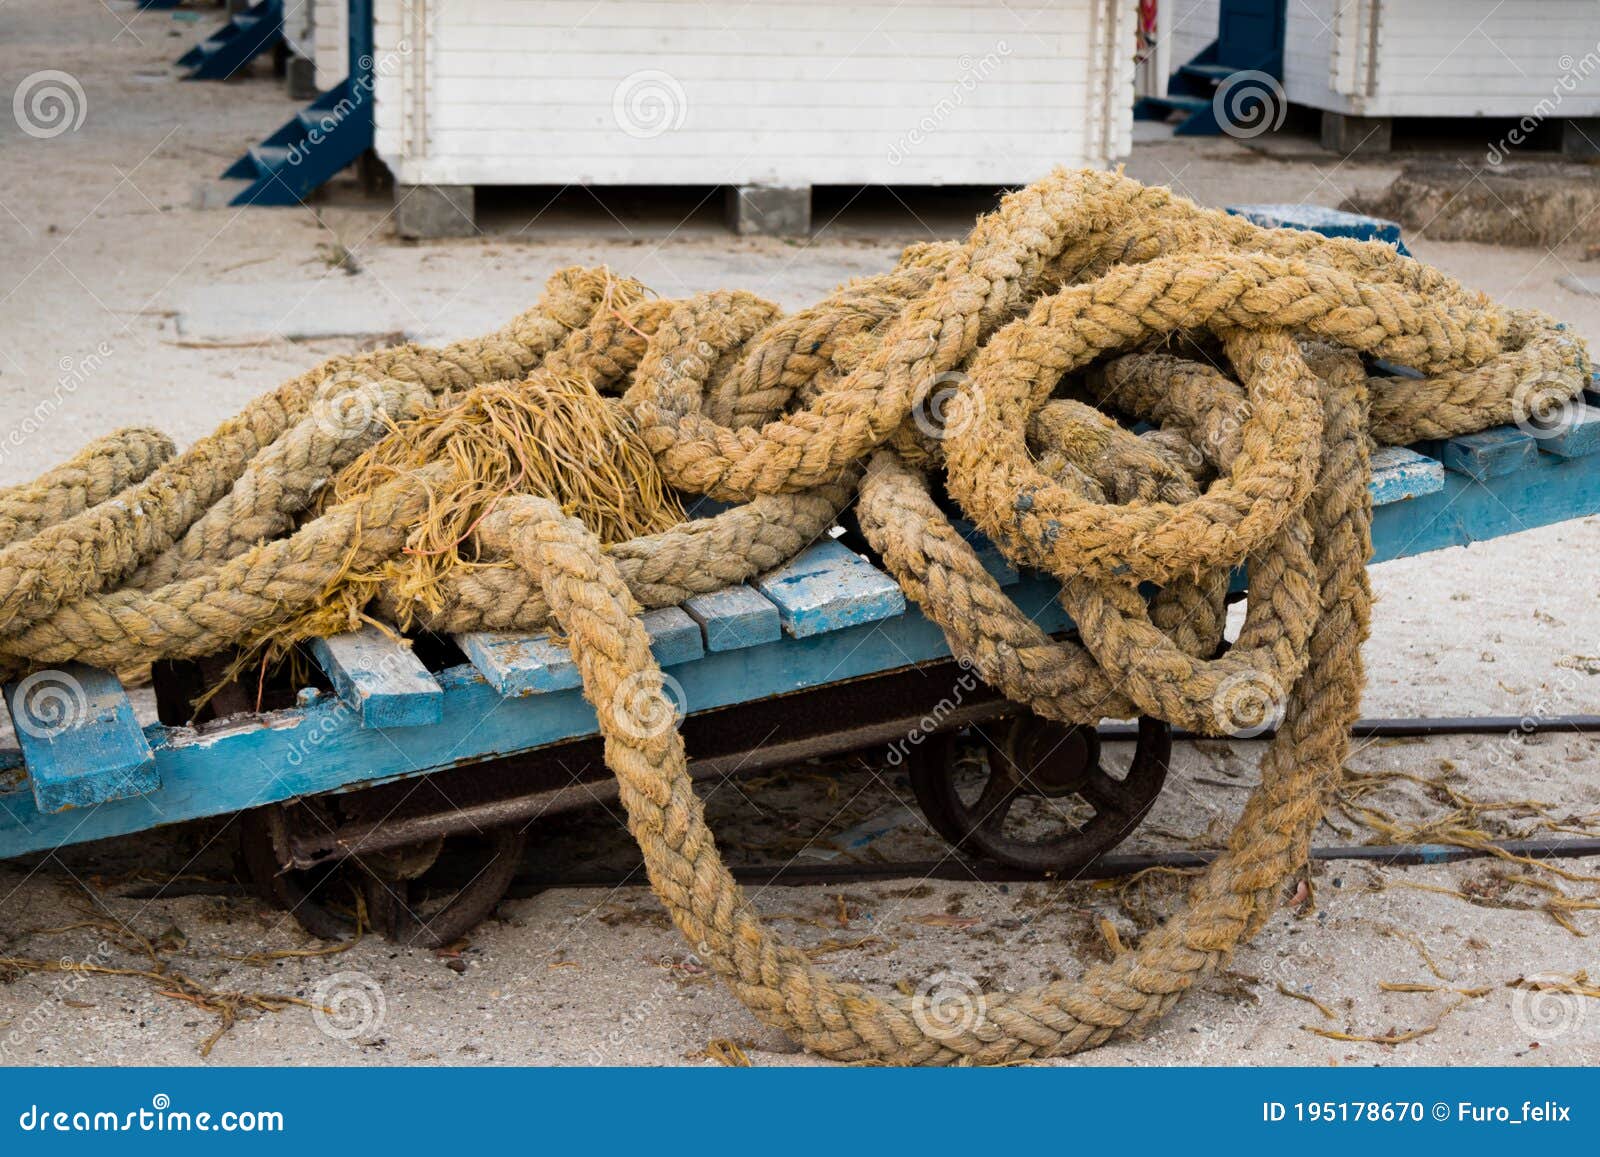 https://thumbs.dreamstime.com/z/old-used-nautical-ship-rope-195178670.jpg